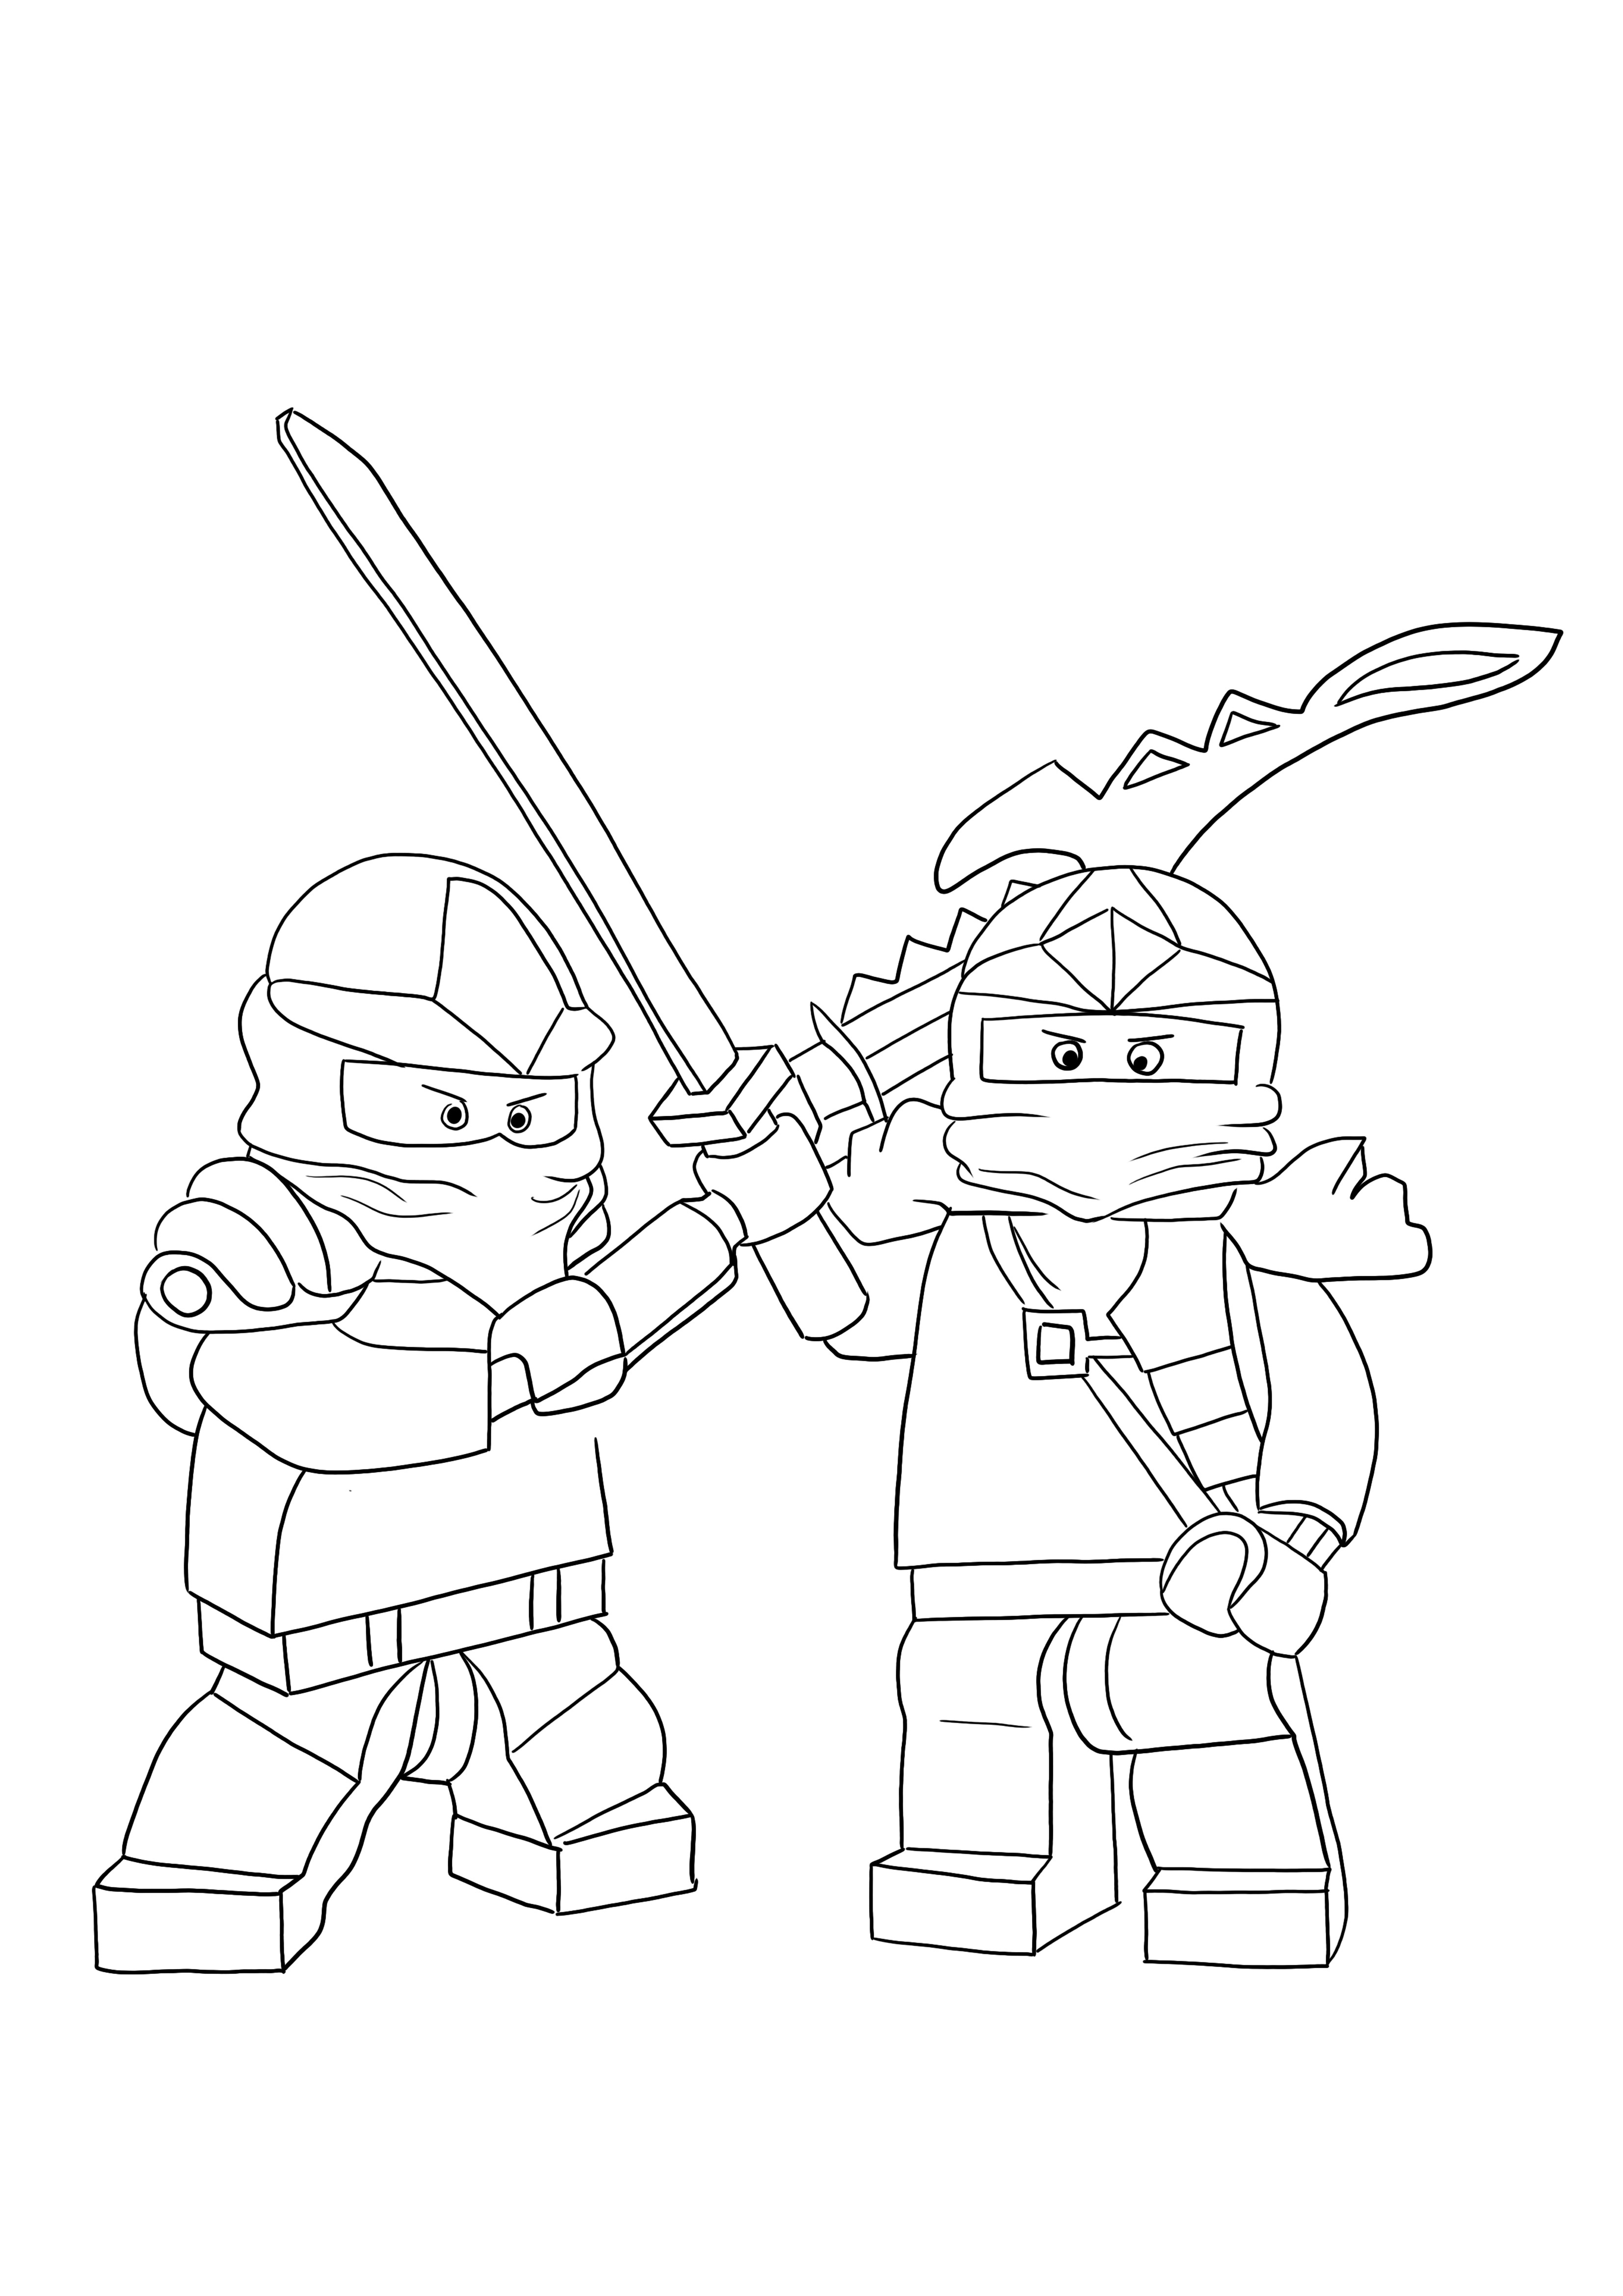 Easy coloring of lego ninjago zx series to download or print